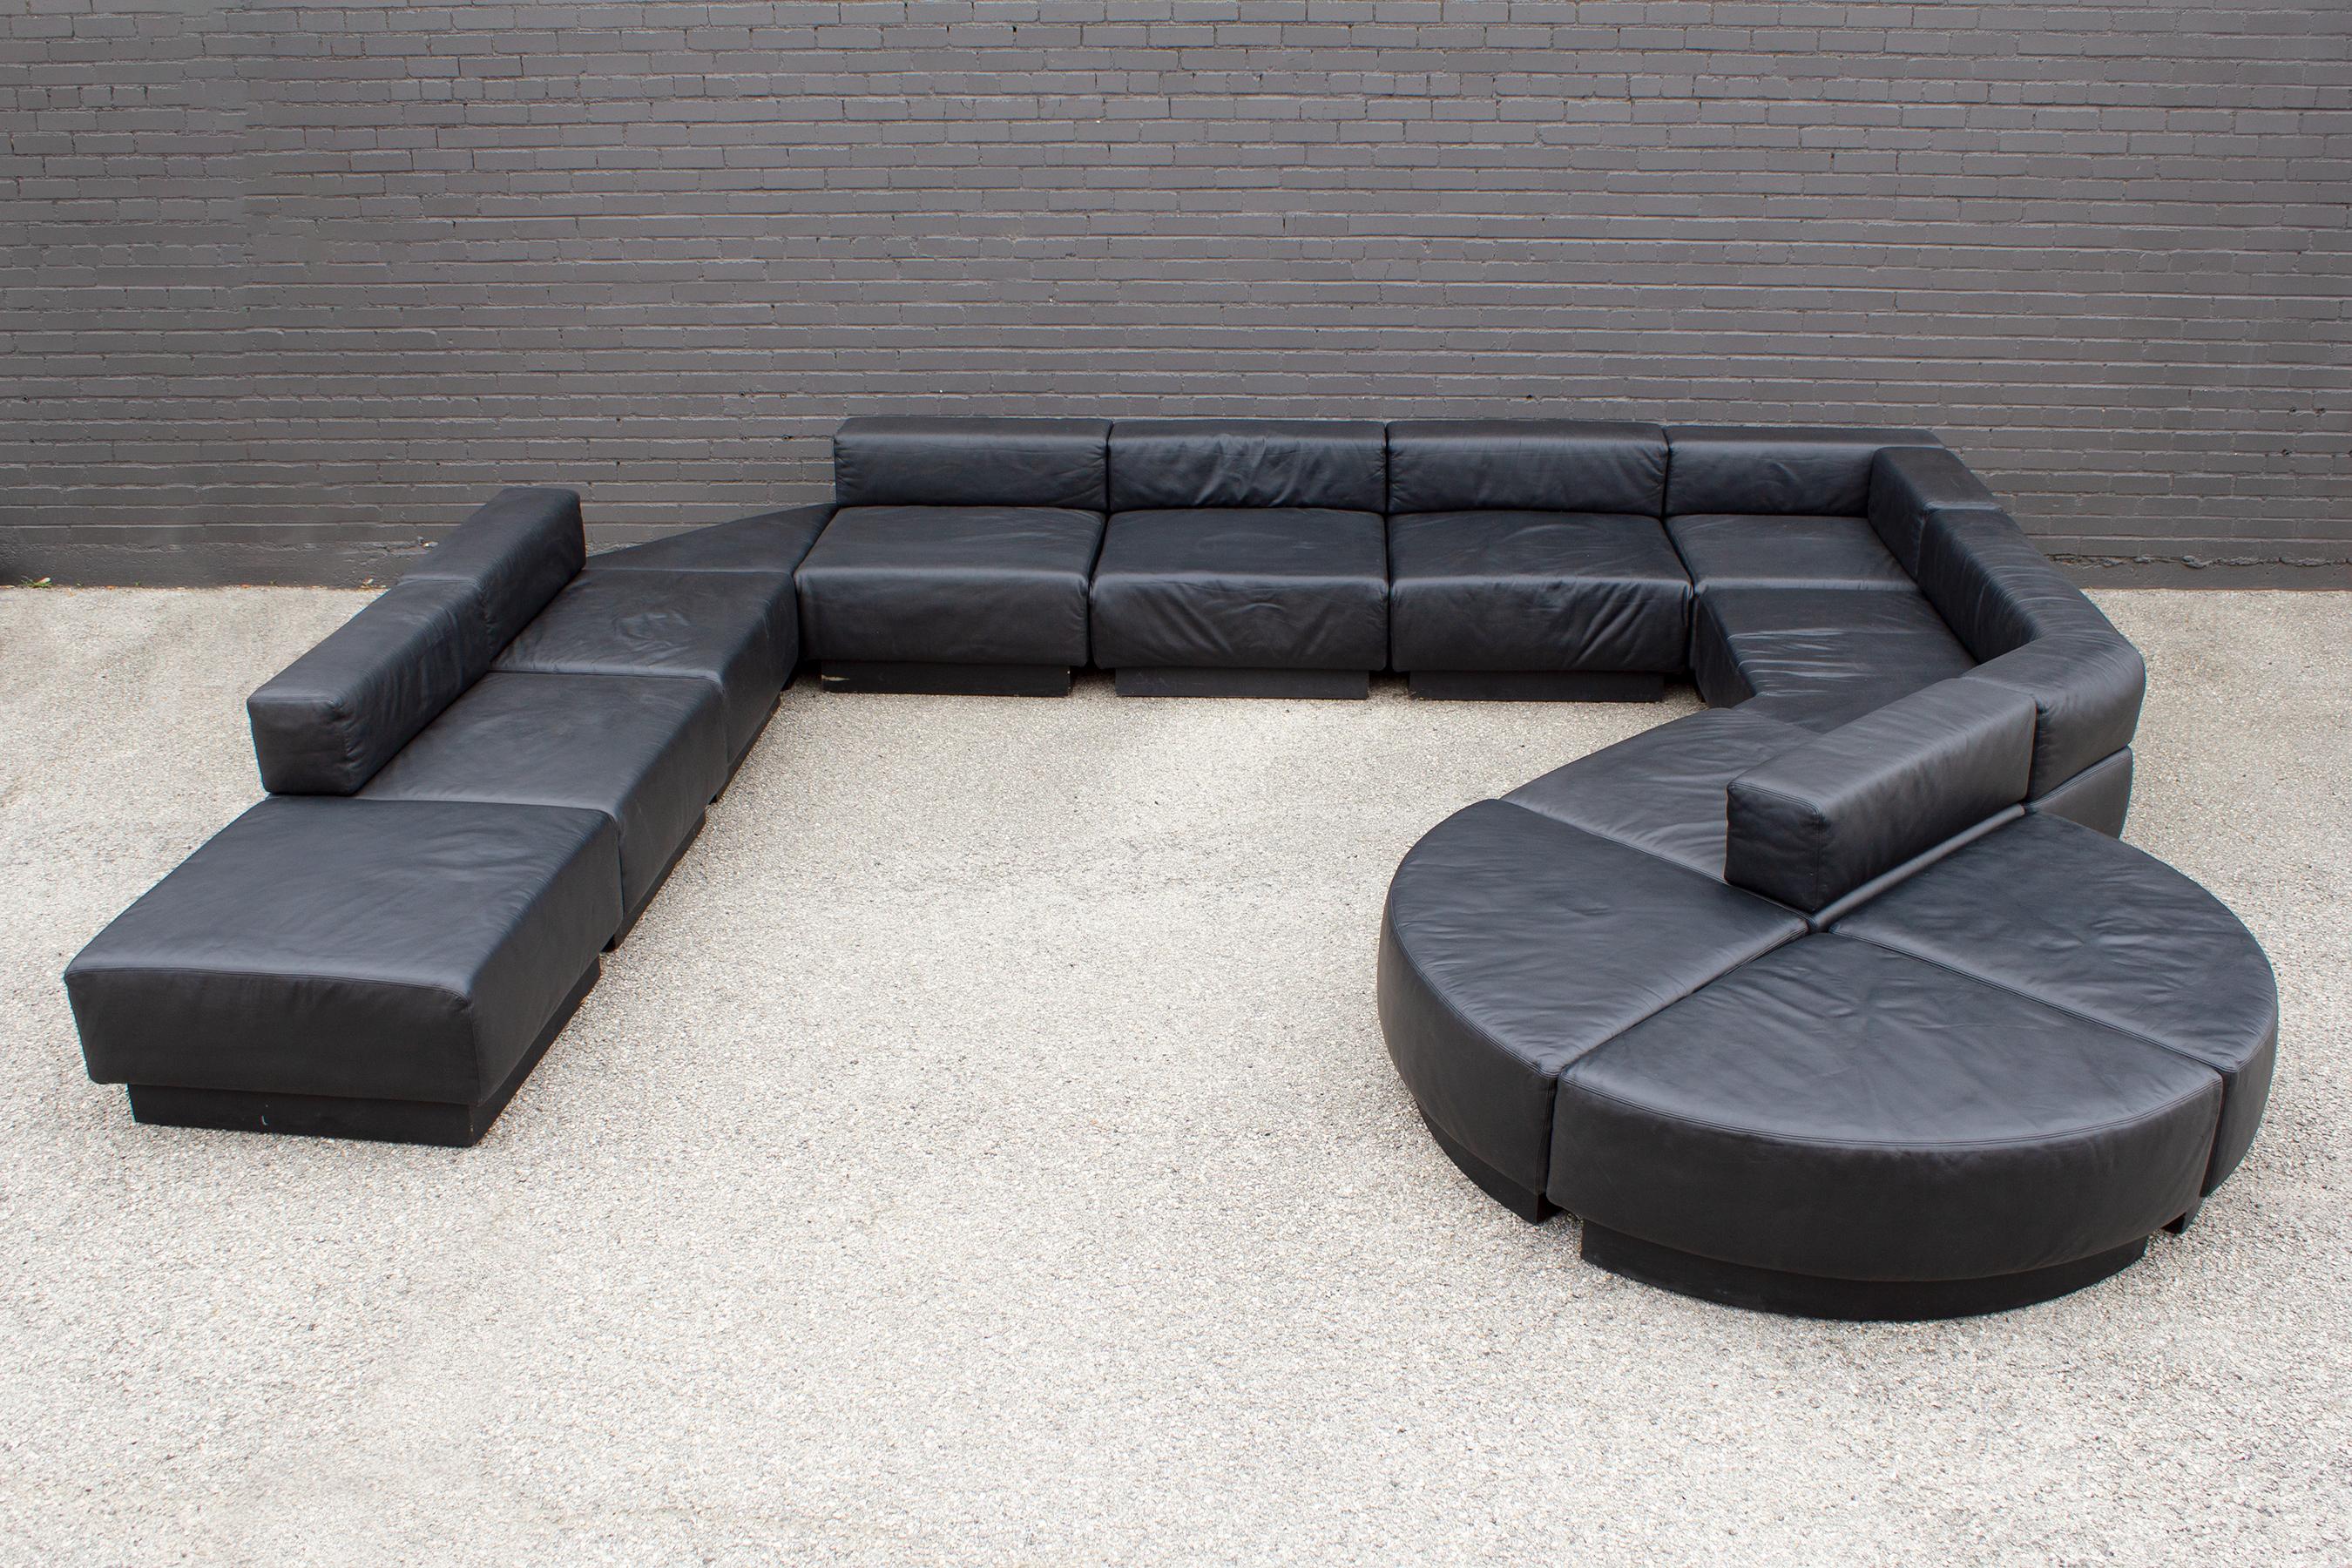 American Black Leather Leather 'Cubo' Sectional Sofa by Harvey Probber, 1970s For Sale